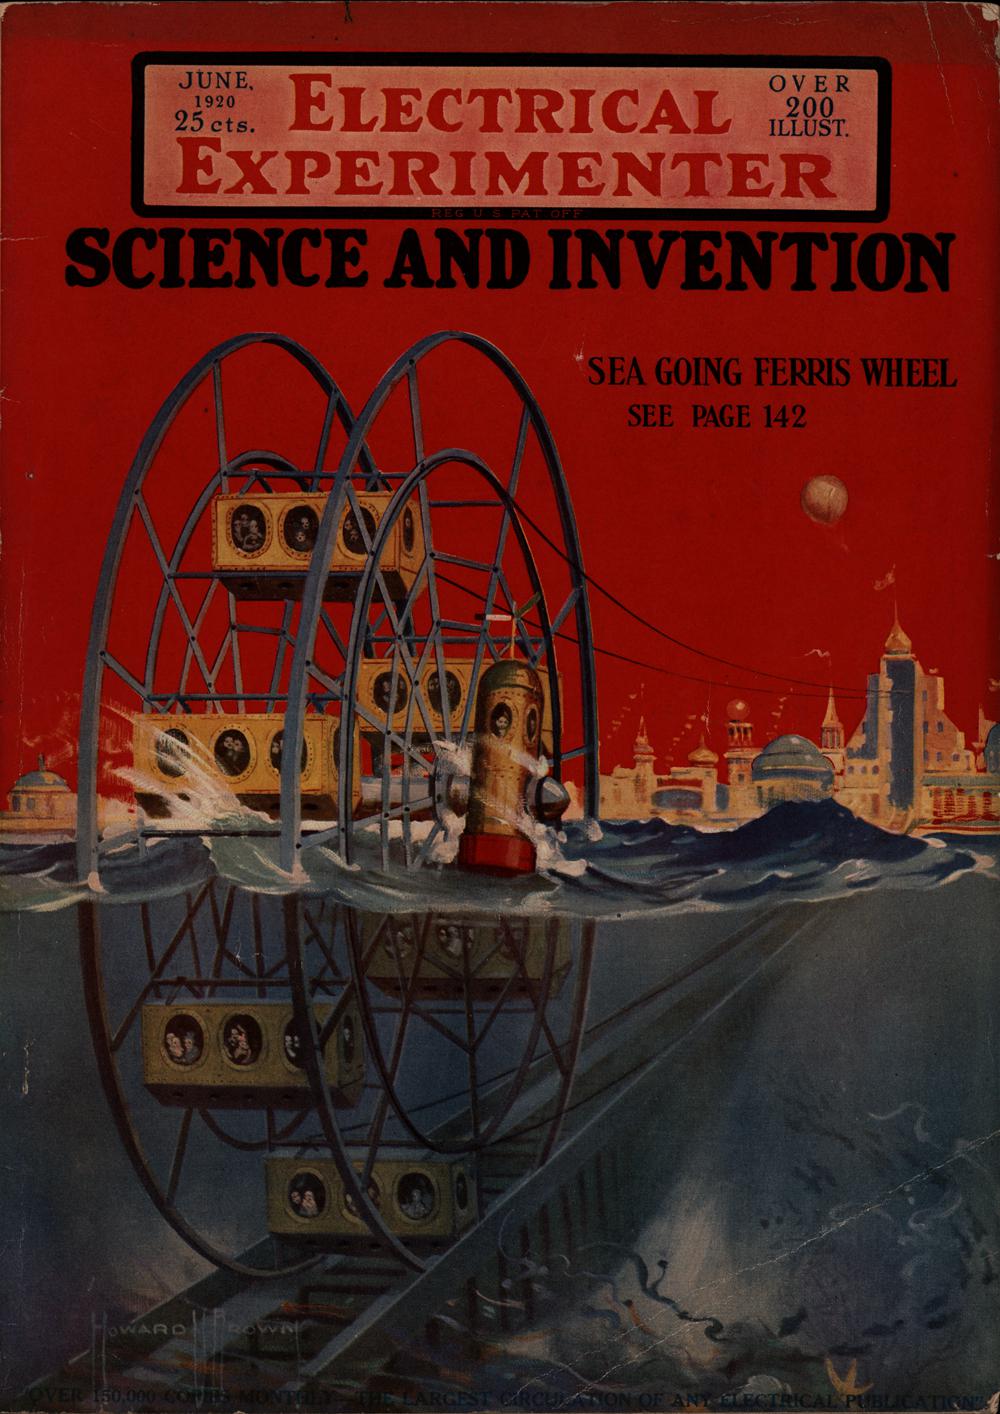 1920 - Science and invention - Vol. 8, No. 2